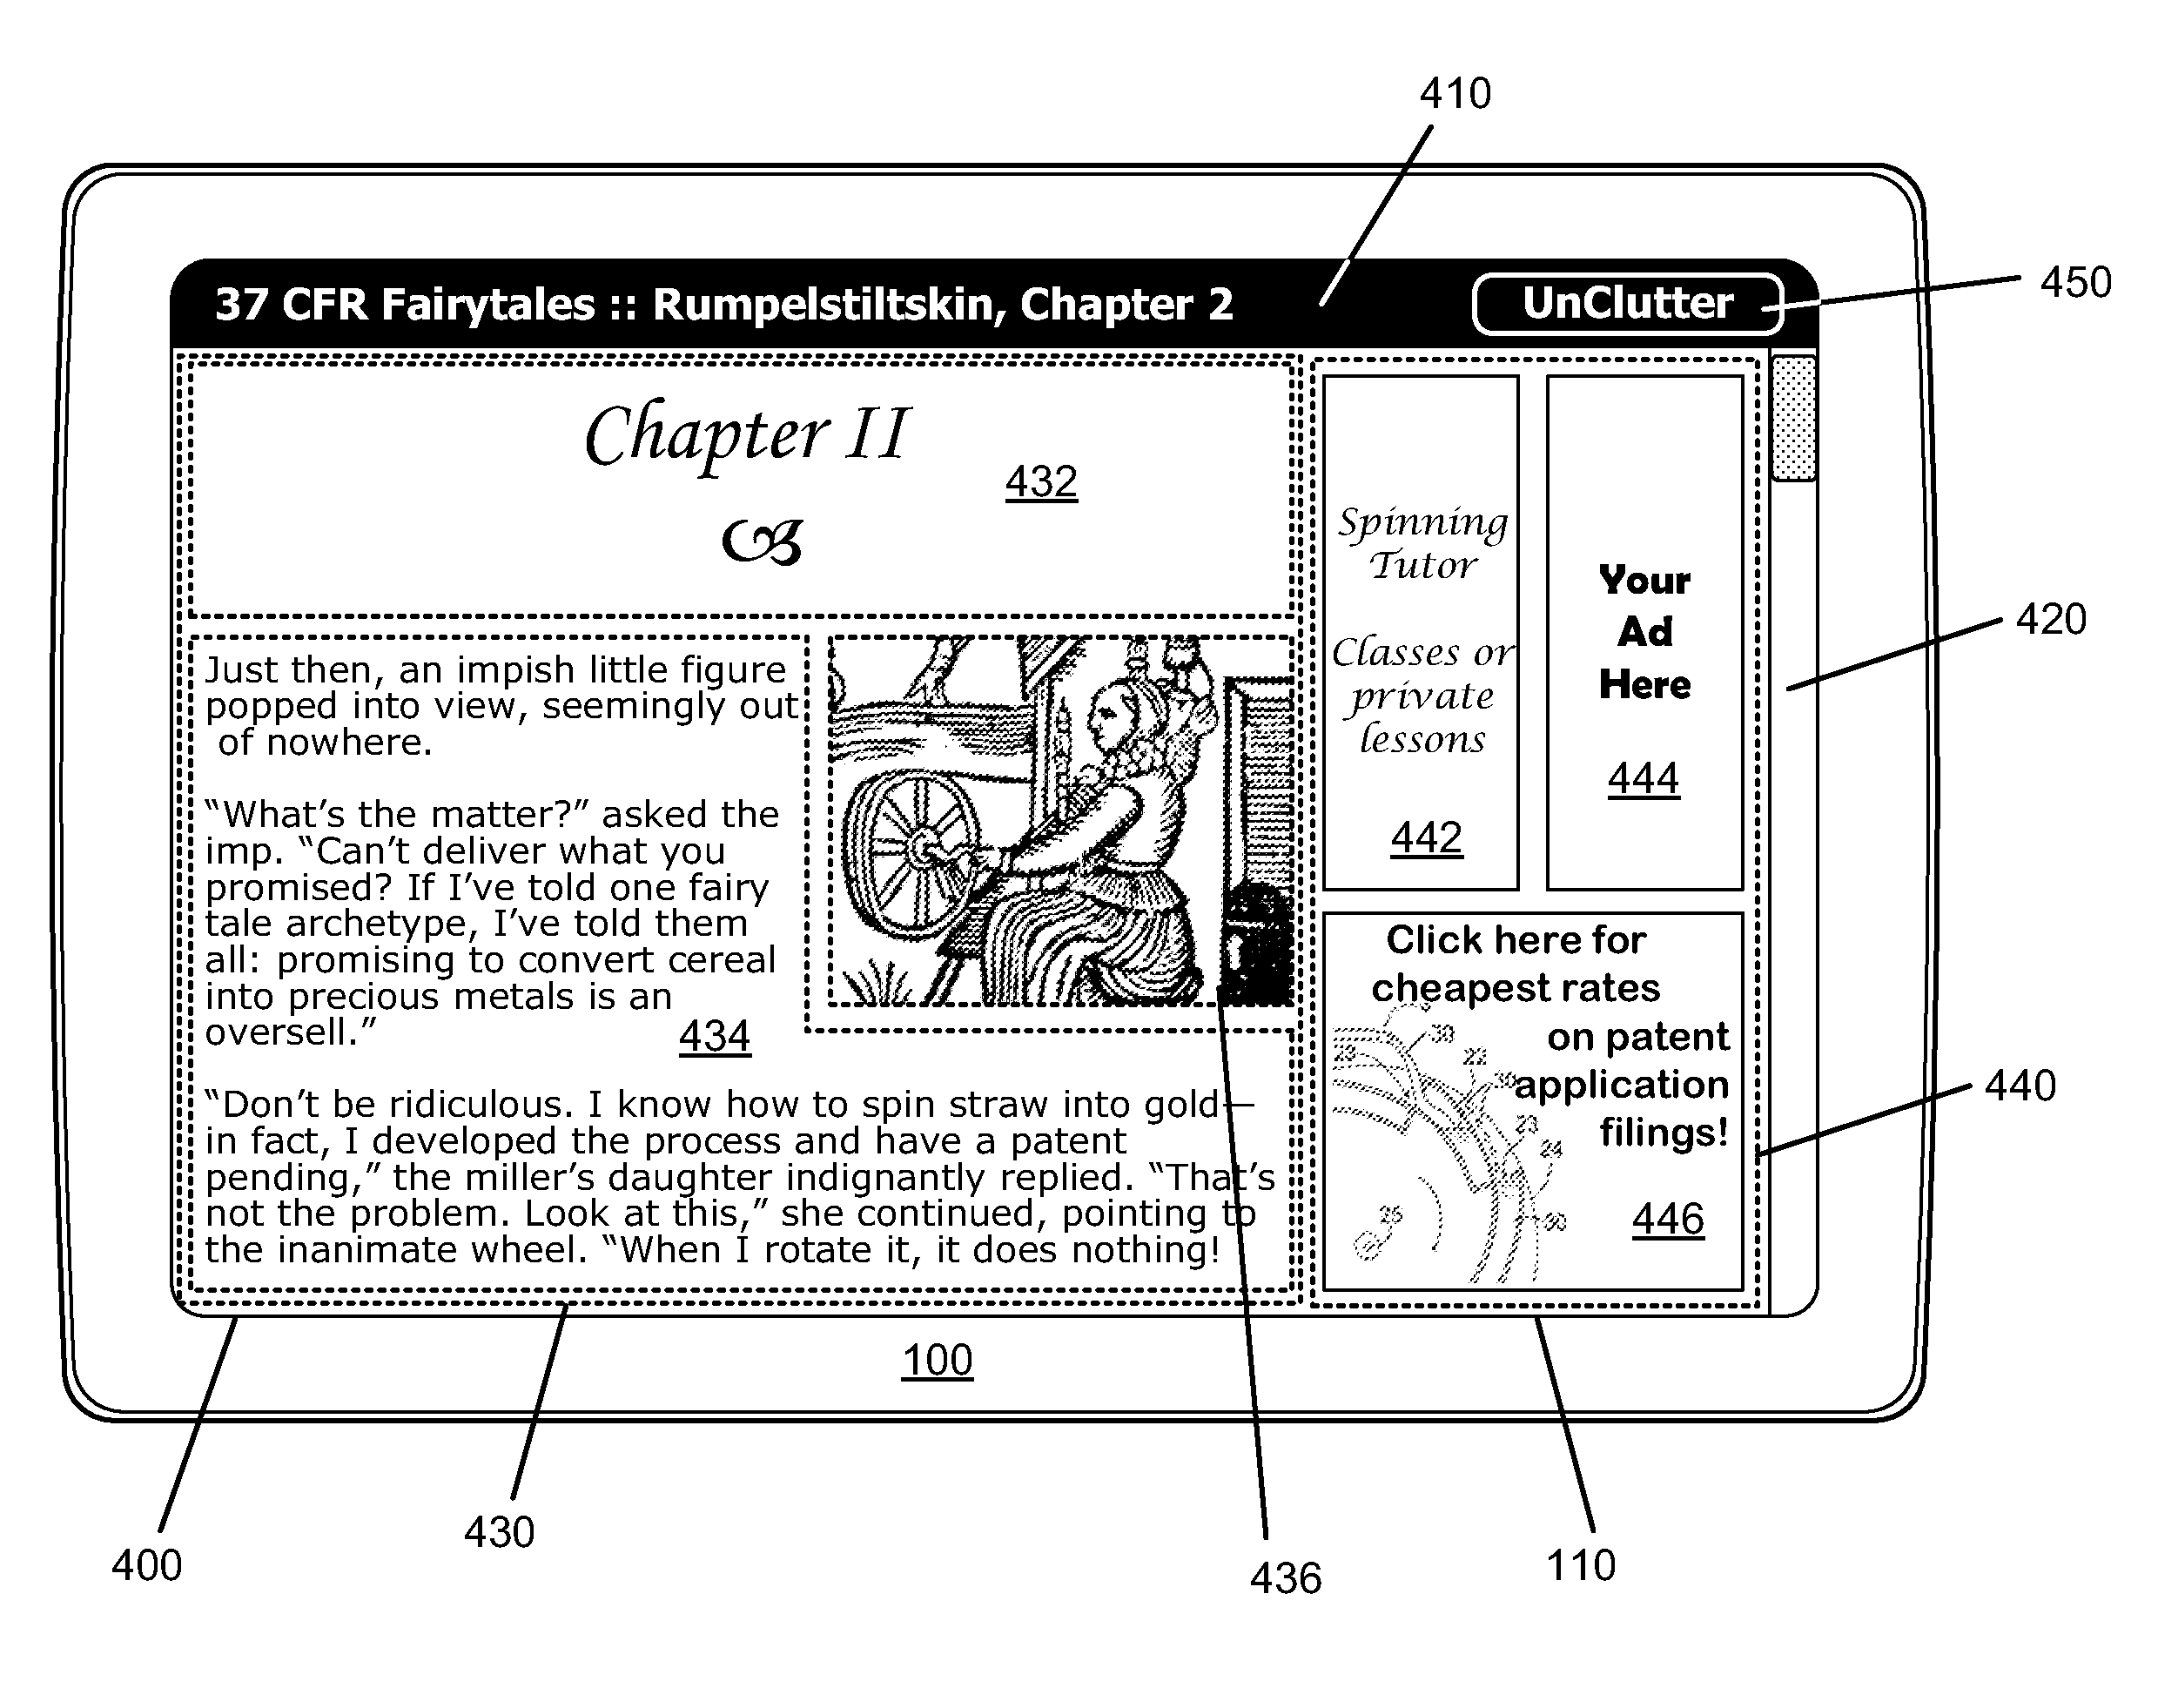 Orientation-dependent processing of input files by an electronic device